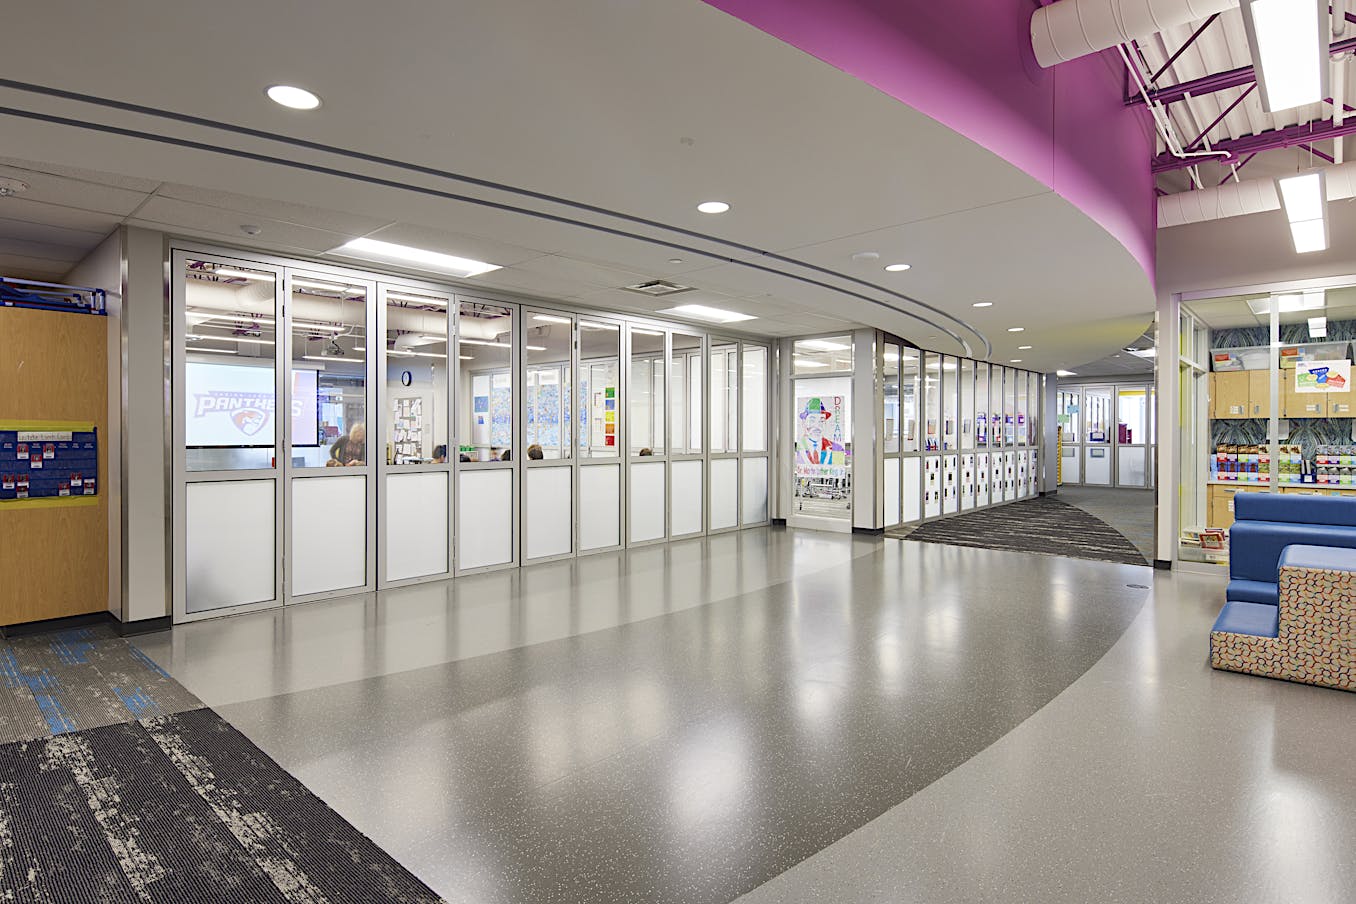 Centerview Elementary with white folding glass walls dividing the classrooms